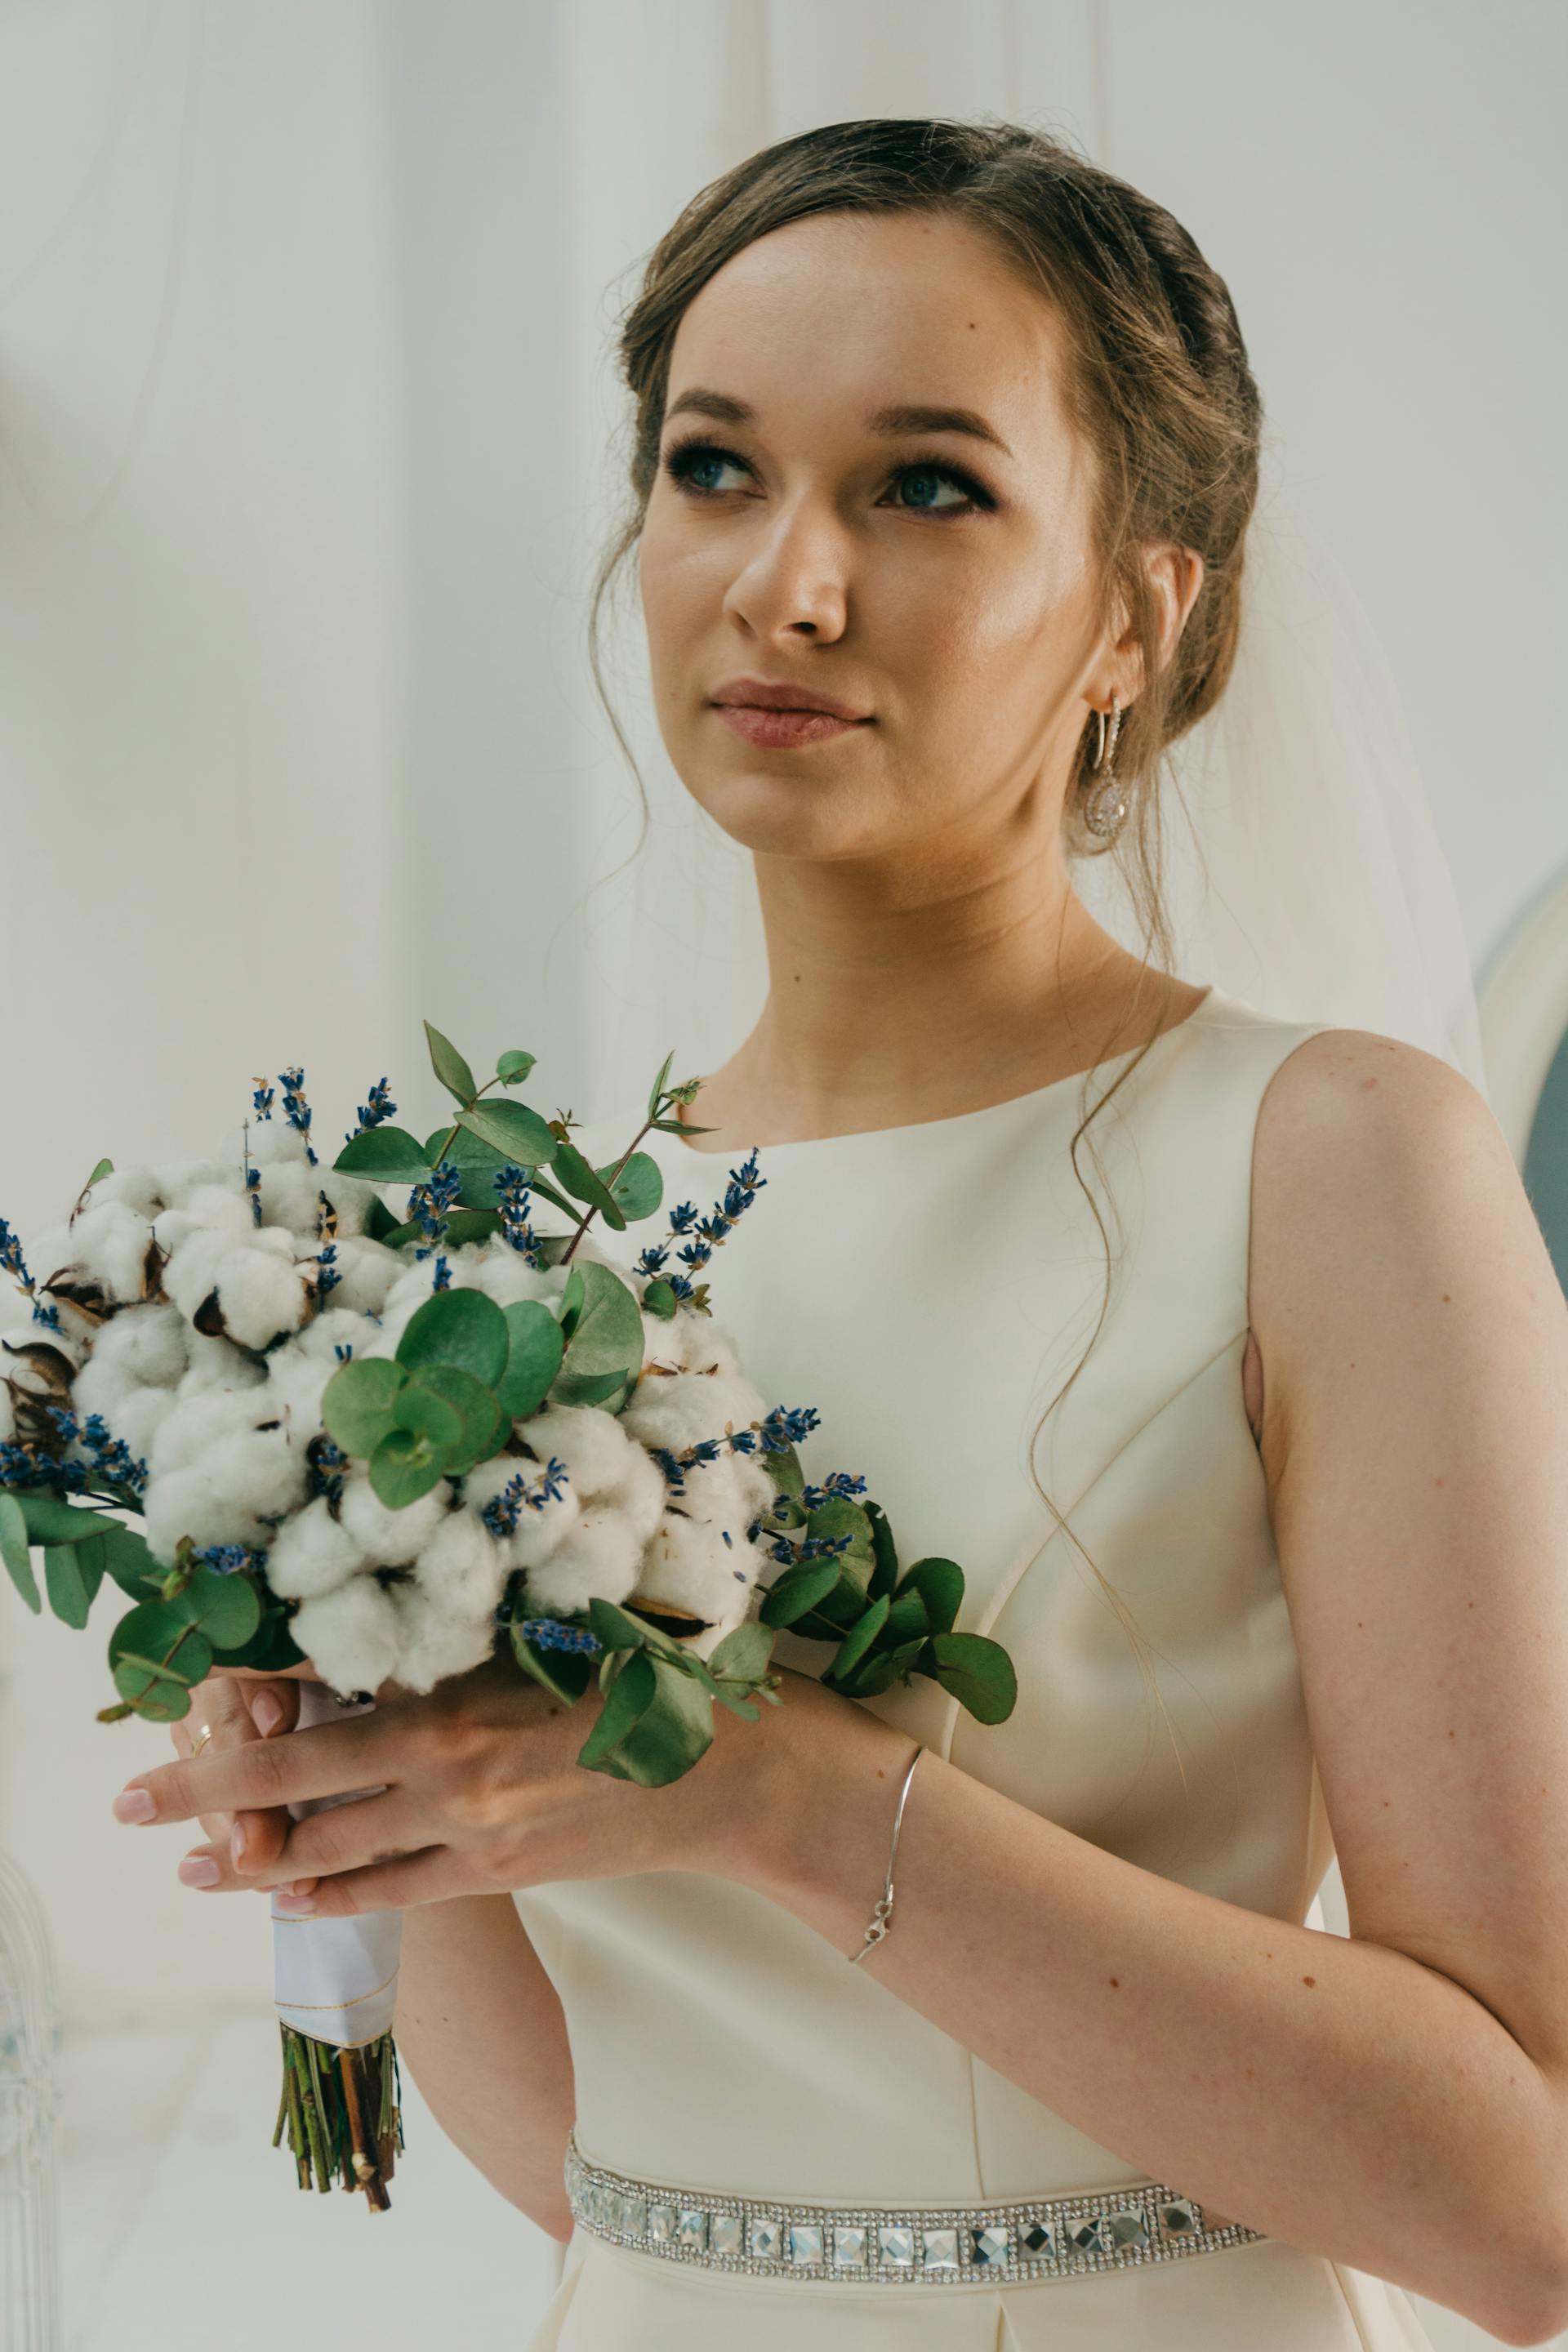 A bride on her wedding day | Source: Pexels